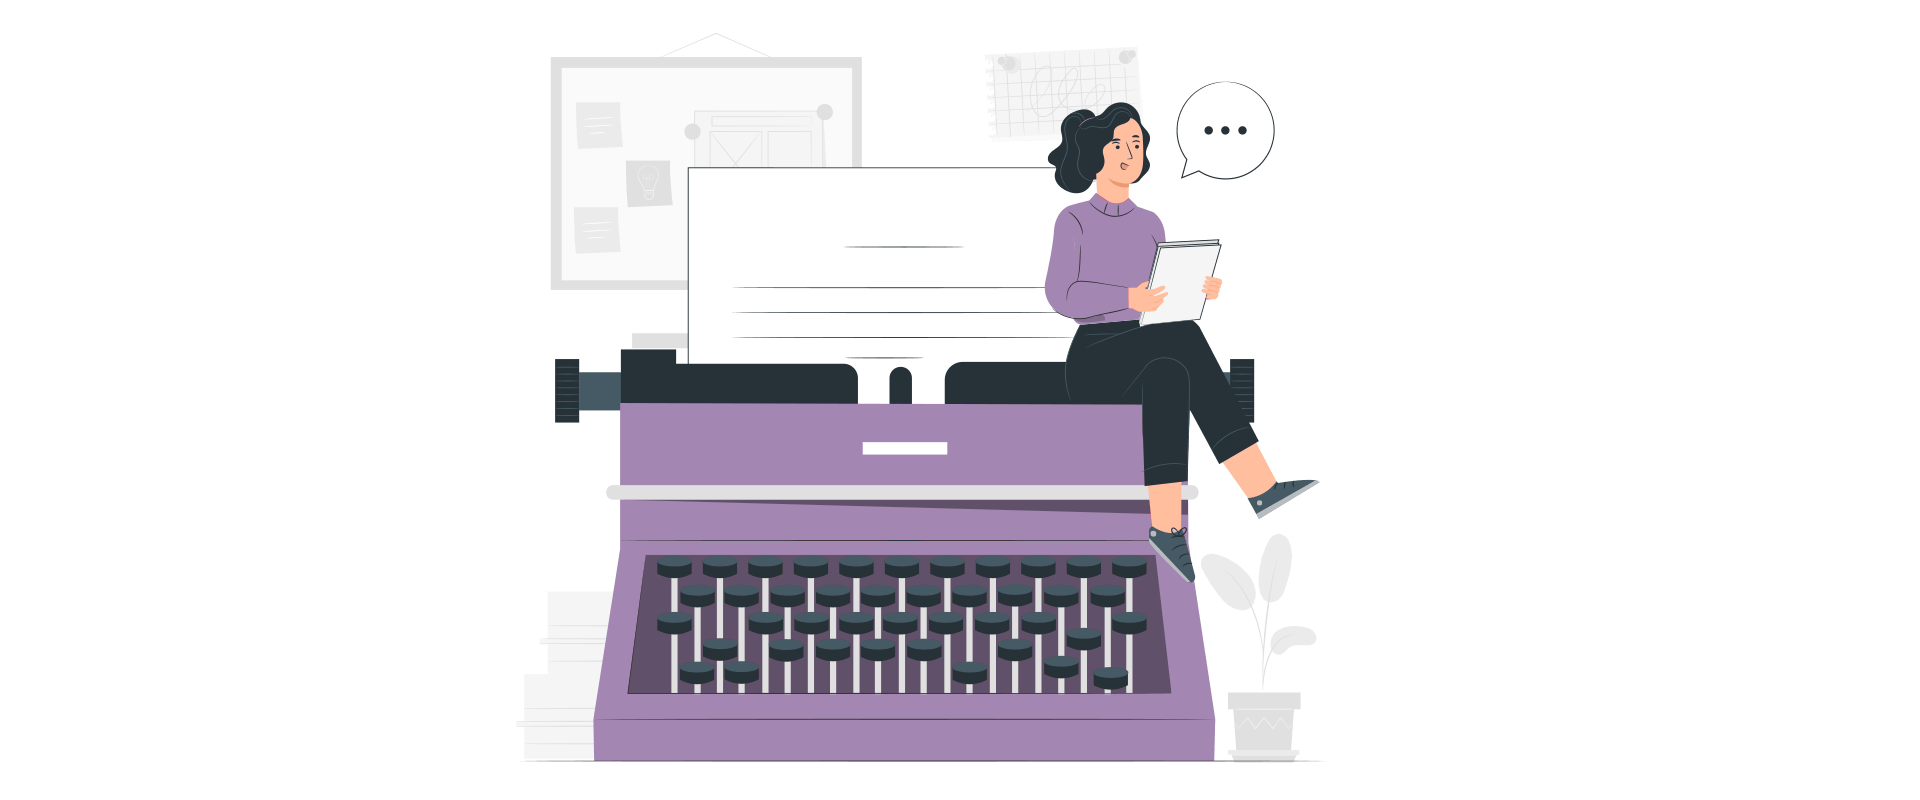 press release writing service